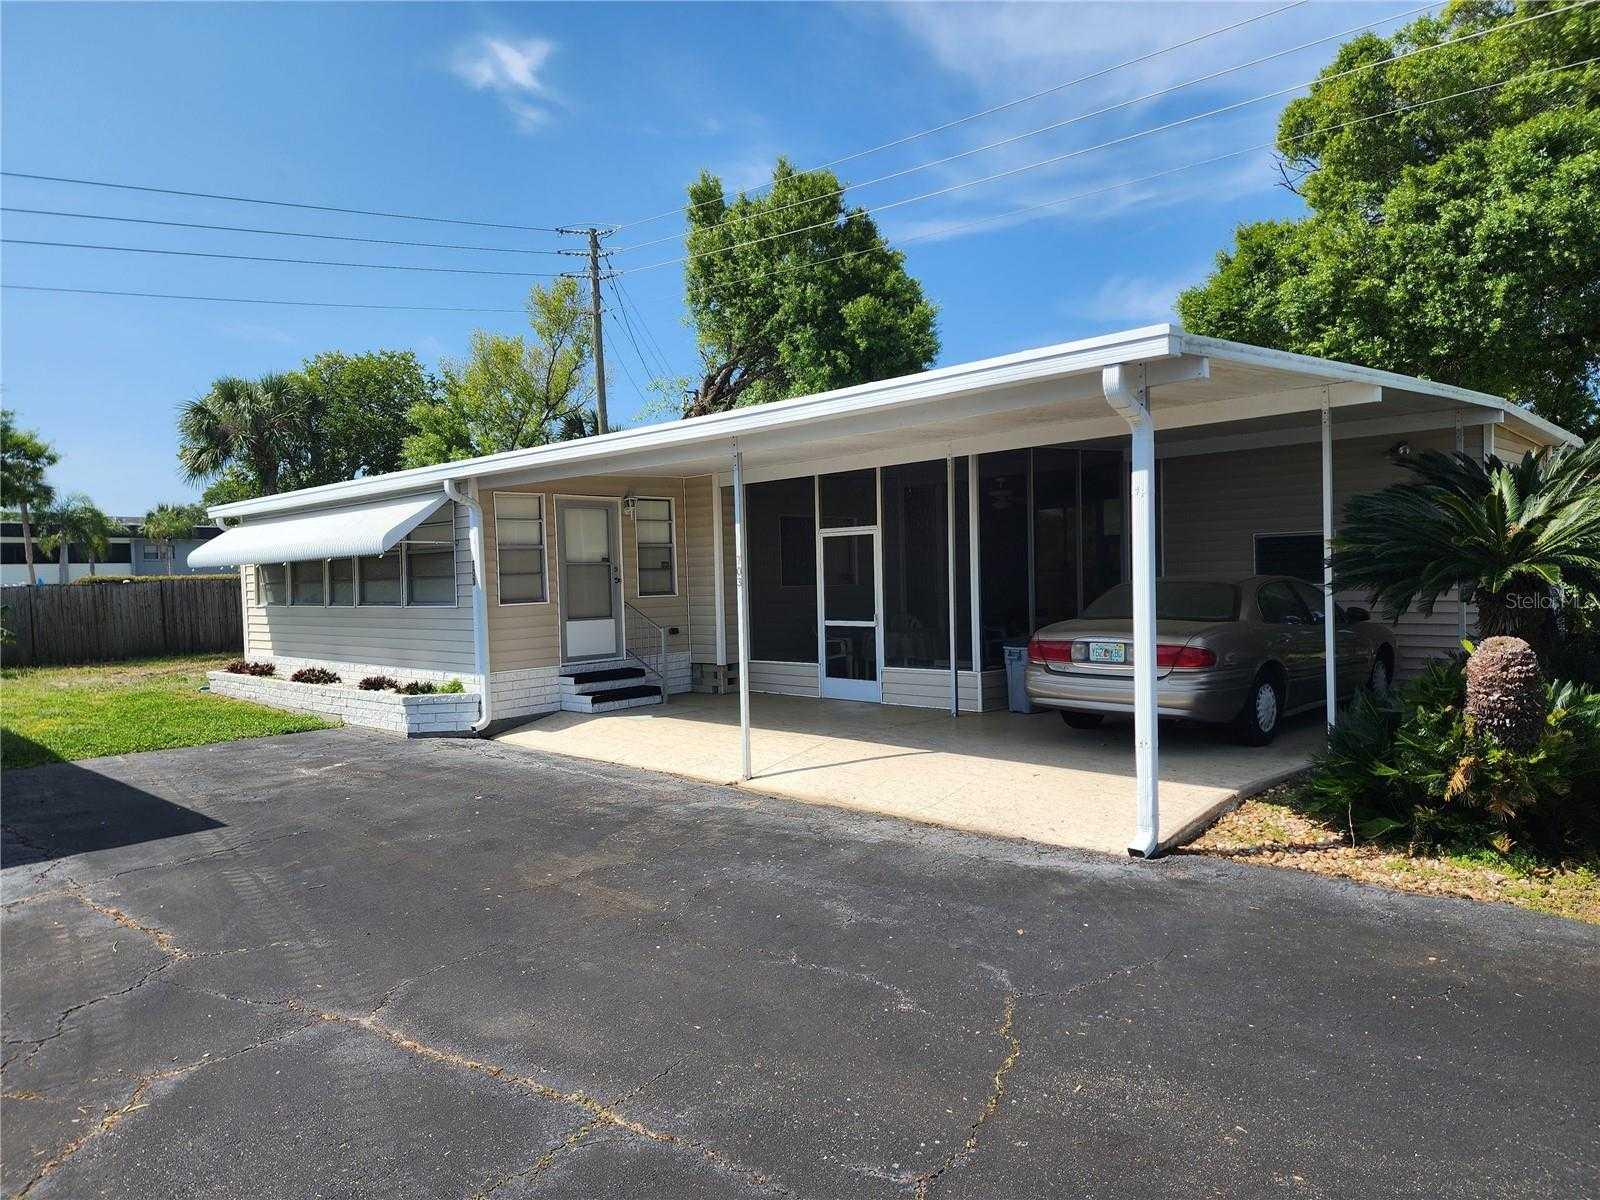 703 CORSICA, BRADENTON, Manufactured Home - Post 1977,  for sale, The Mount Dora Group 